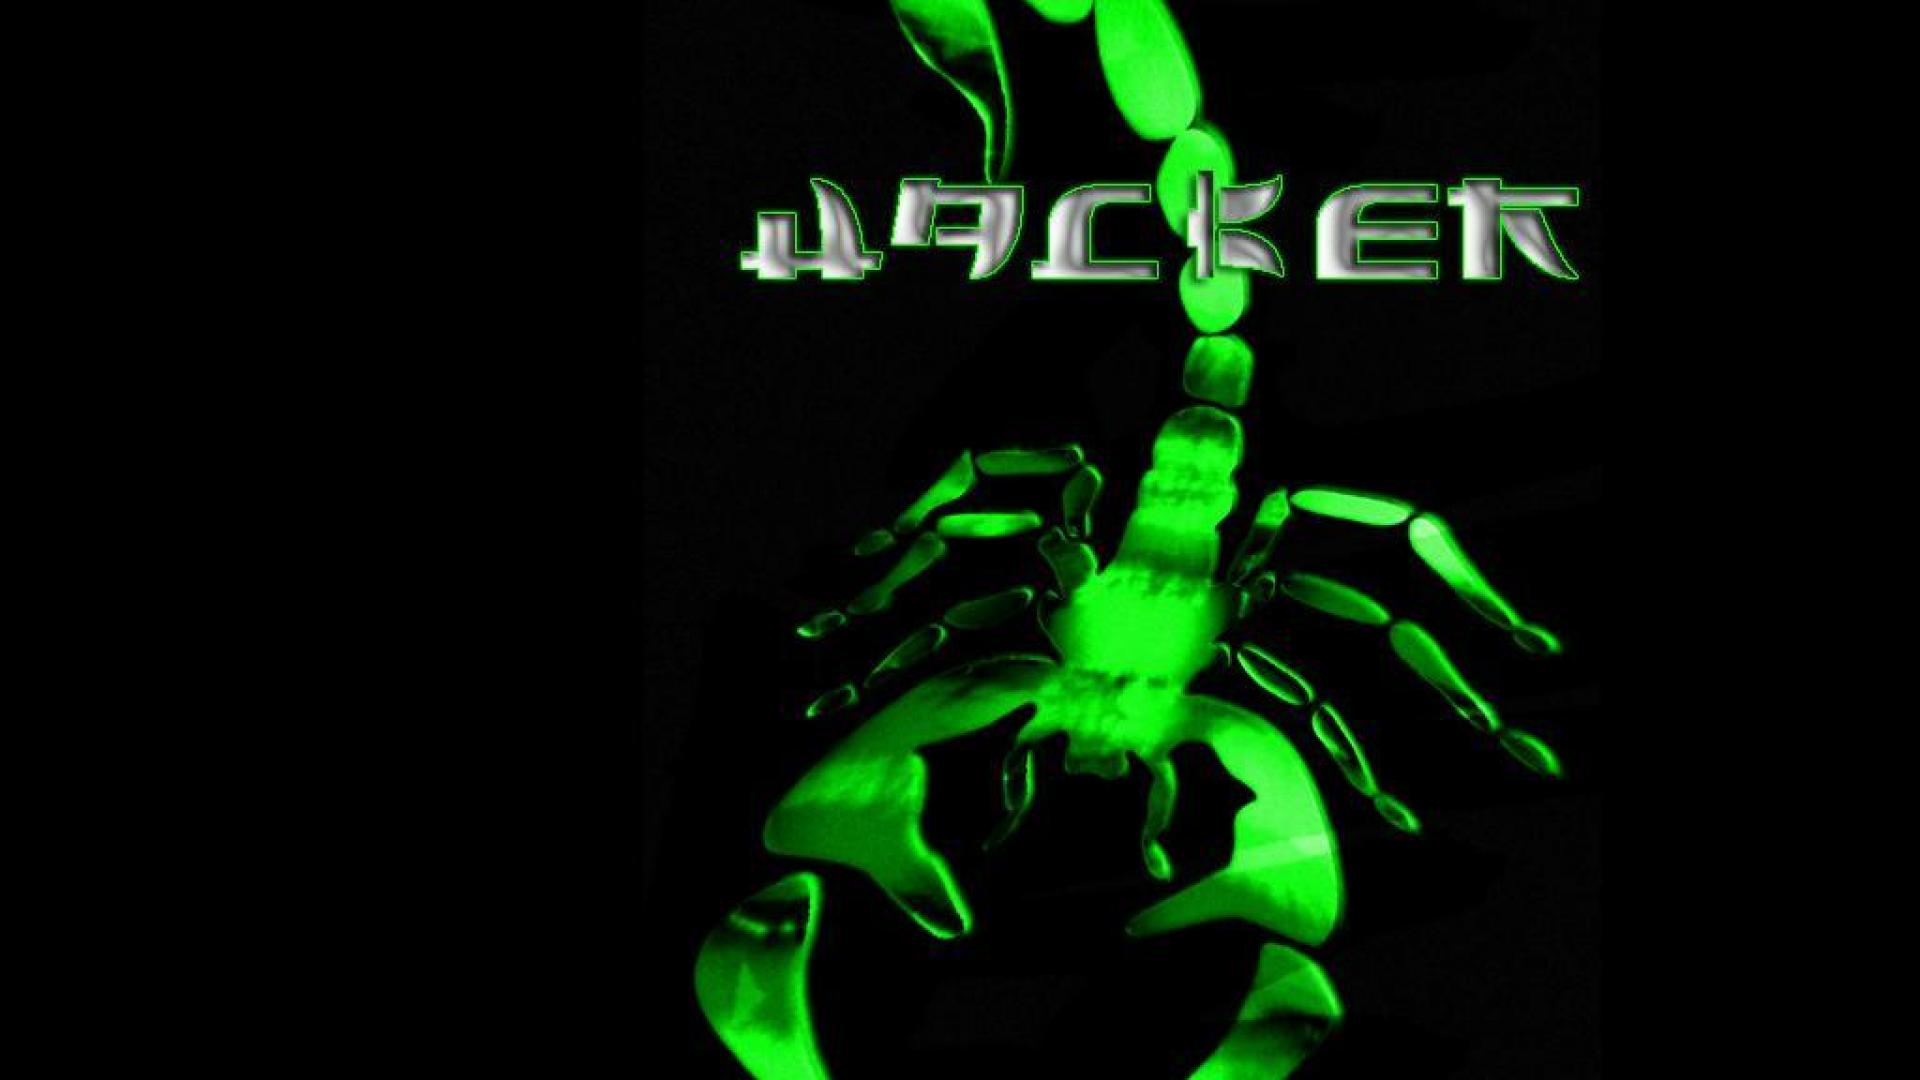 Top 10 HD Wallpapers for Hackers | Hacks and Glitches Portal